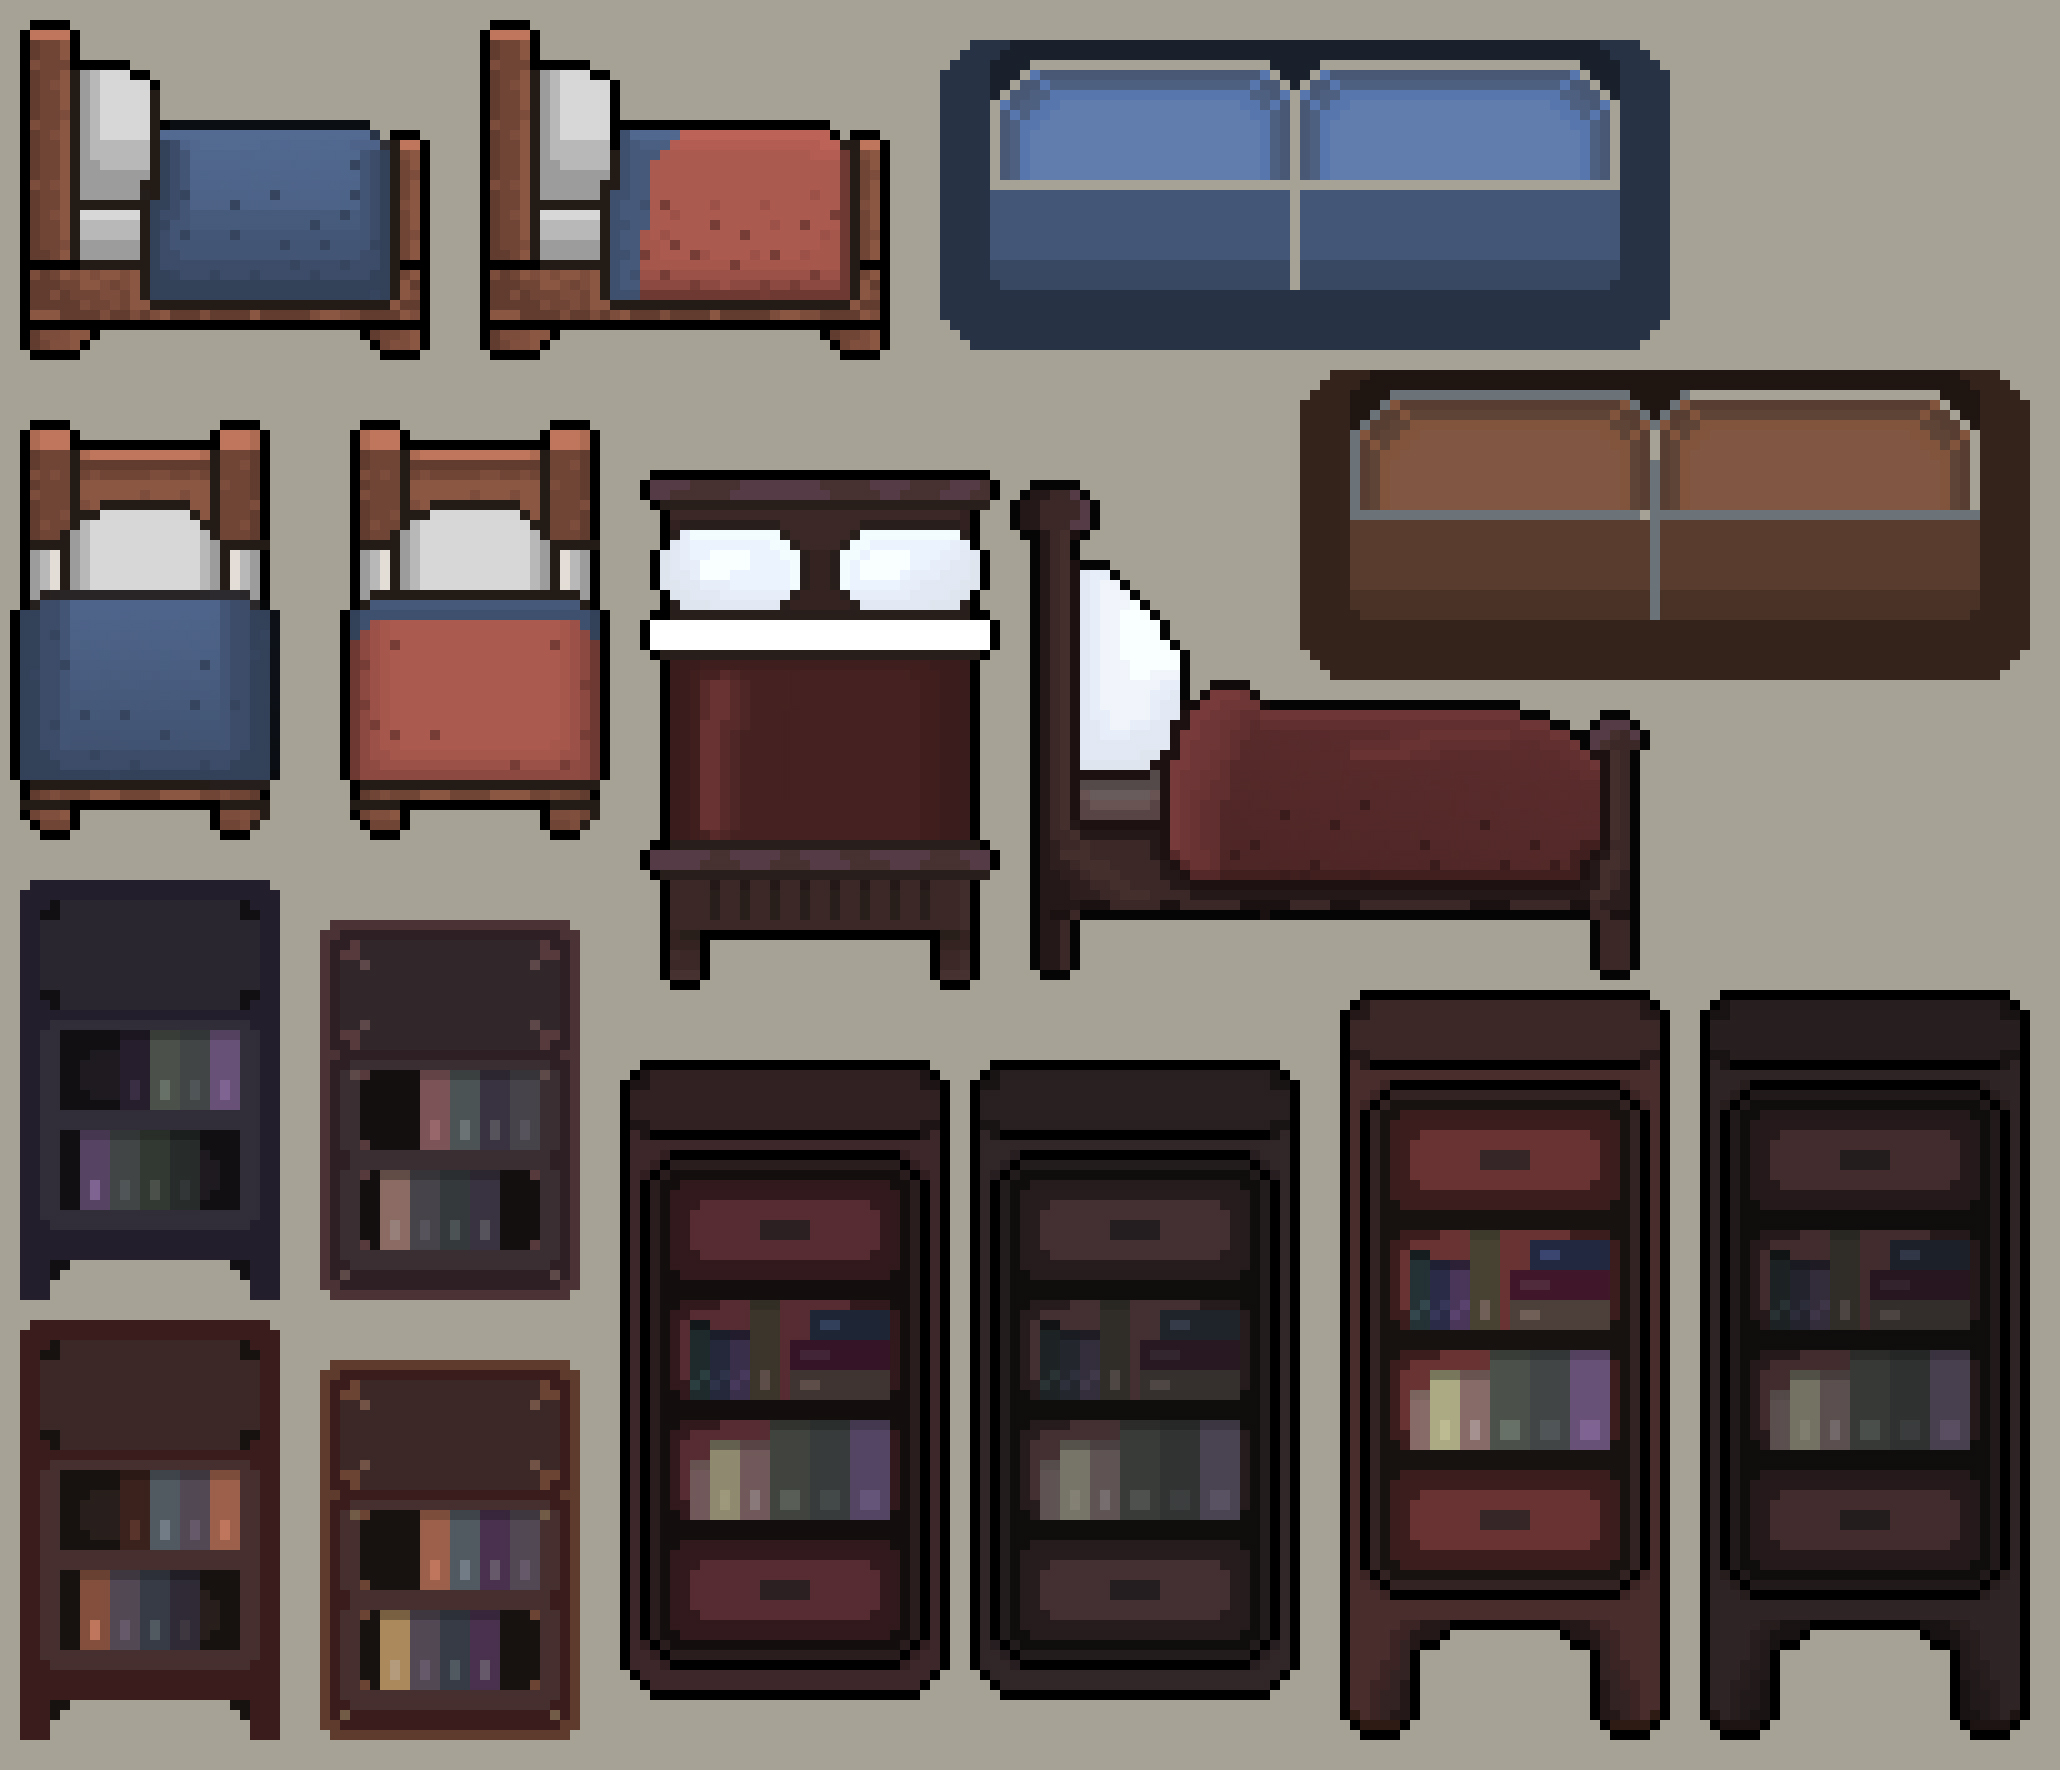 Pixel Art Environment - Furniture and Cabinets